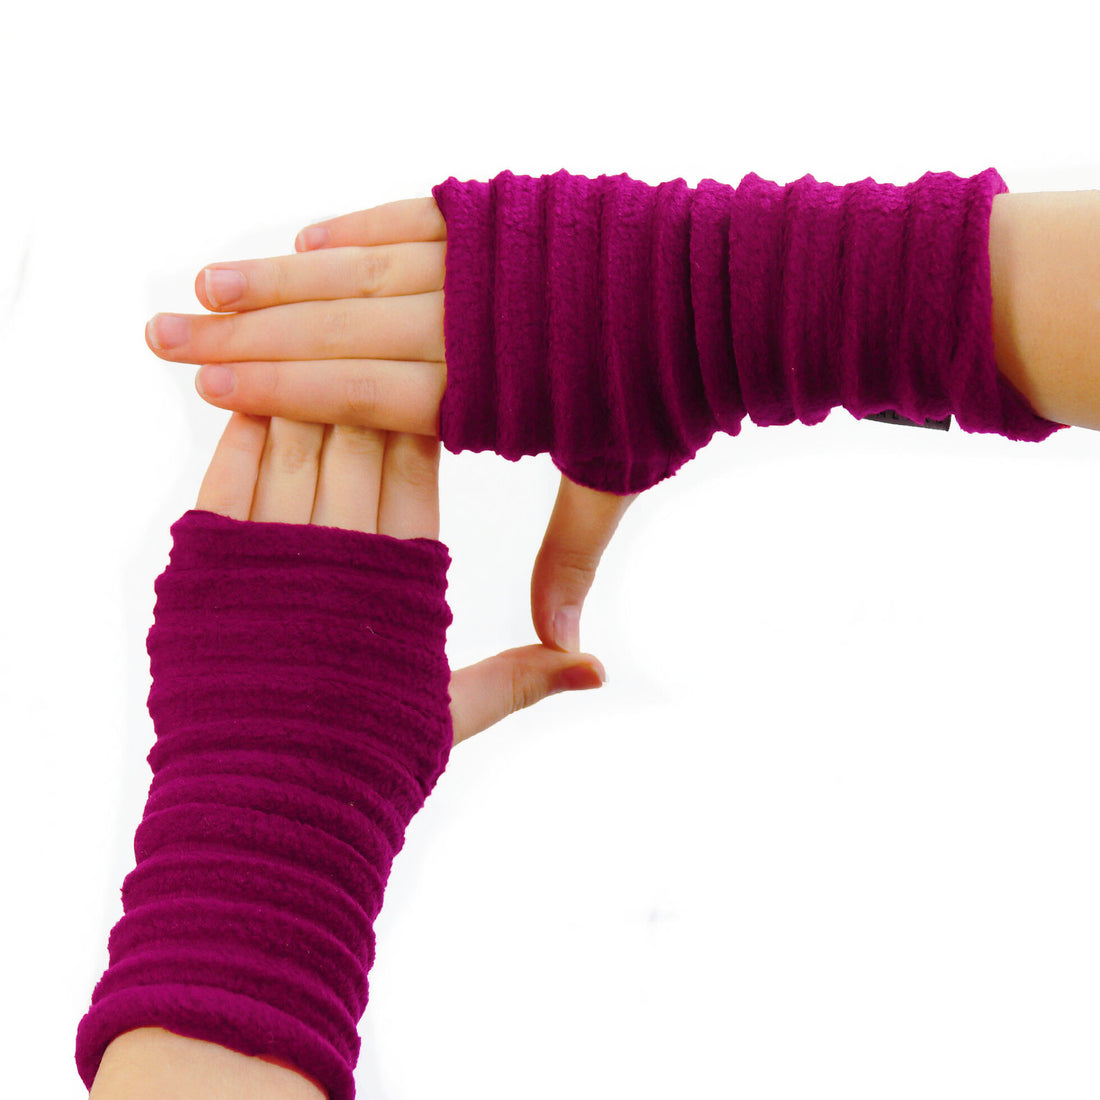 JUNIOR PLEATED 'WRISTEES' WRISTWARMERS FOR CHILDREN | 7-11 YEARS